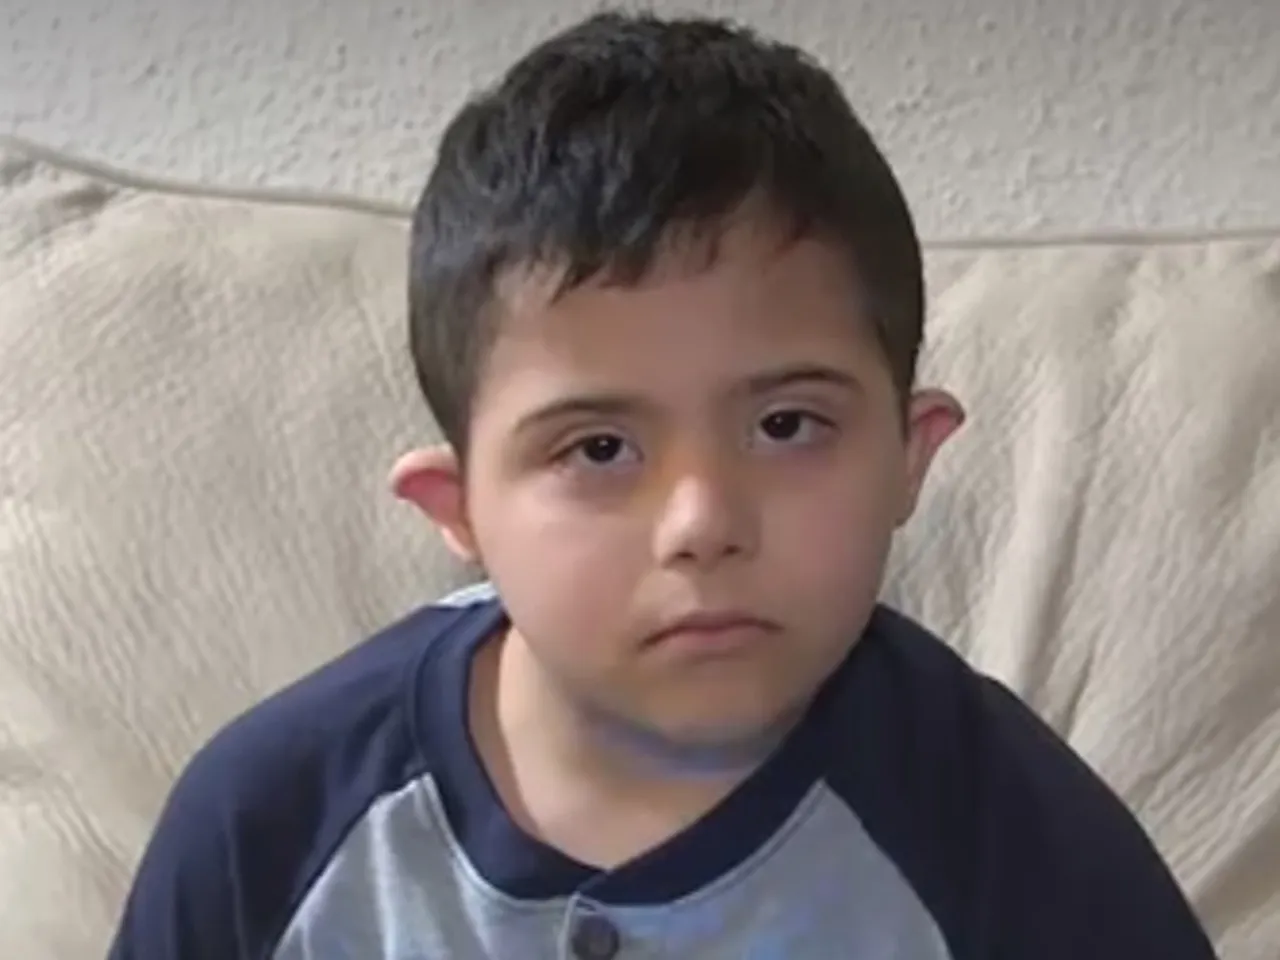 Houston: Teacher calls the cops after six-year-old Muslim child says ‘Allah’ in class